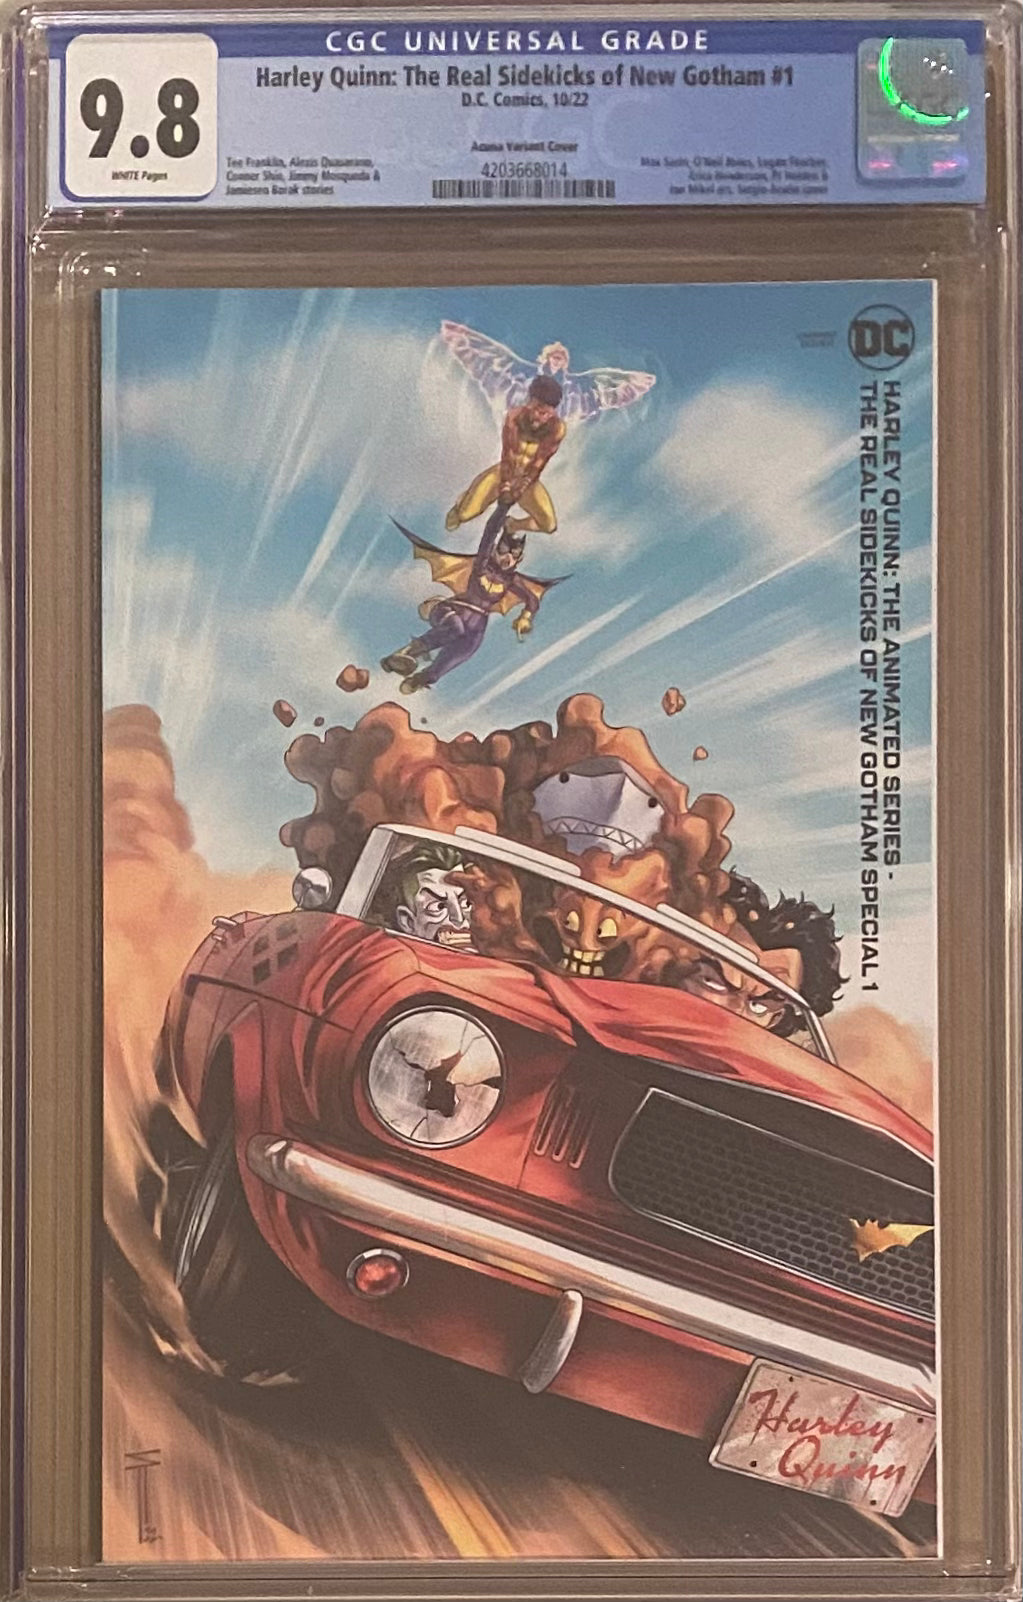 Harley Quinn: The Animated Series - The Real Sidekicks of New Gotham Special #1 Acuna 1:25 Retailer Incentive Variant CGC 9.8